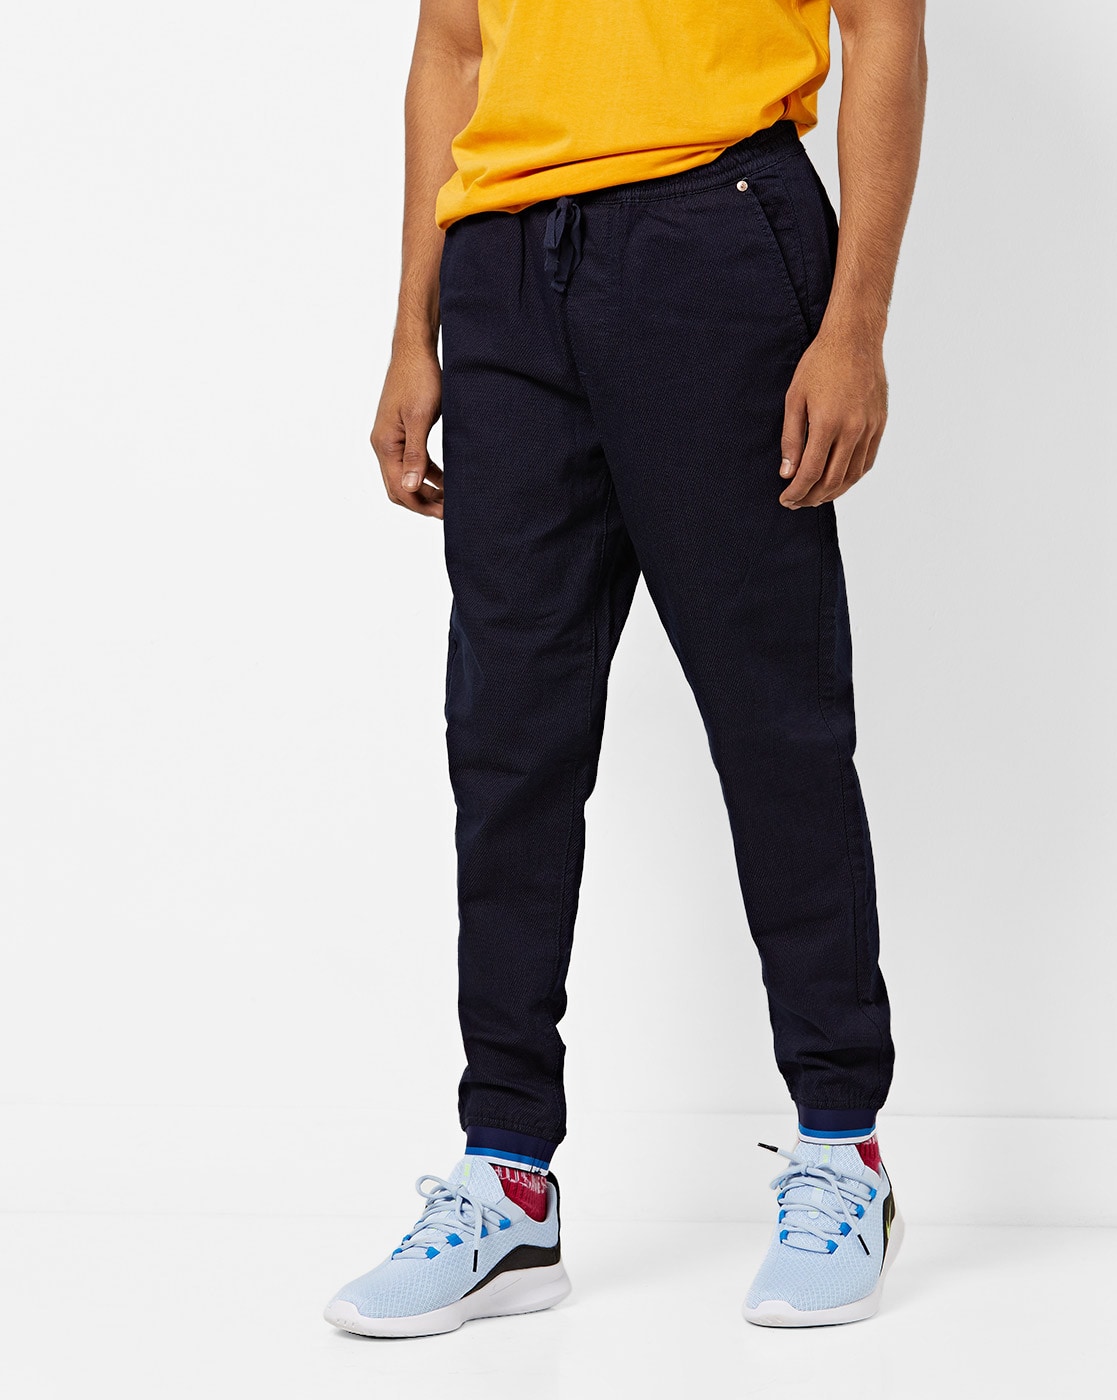 ucb joggers jeans